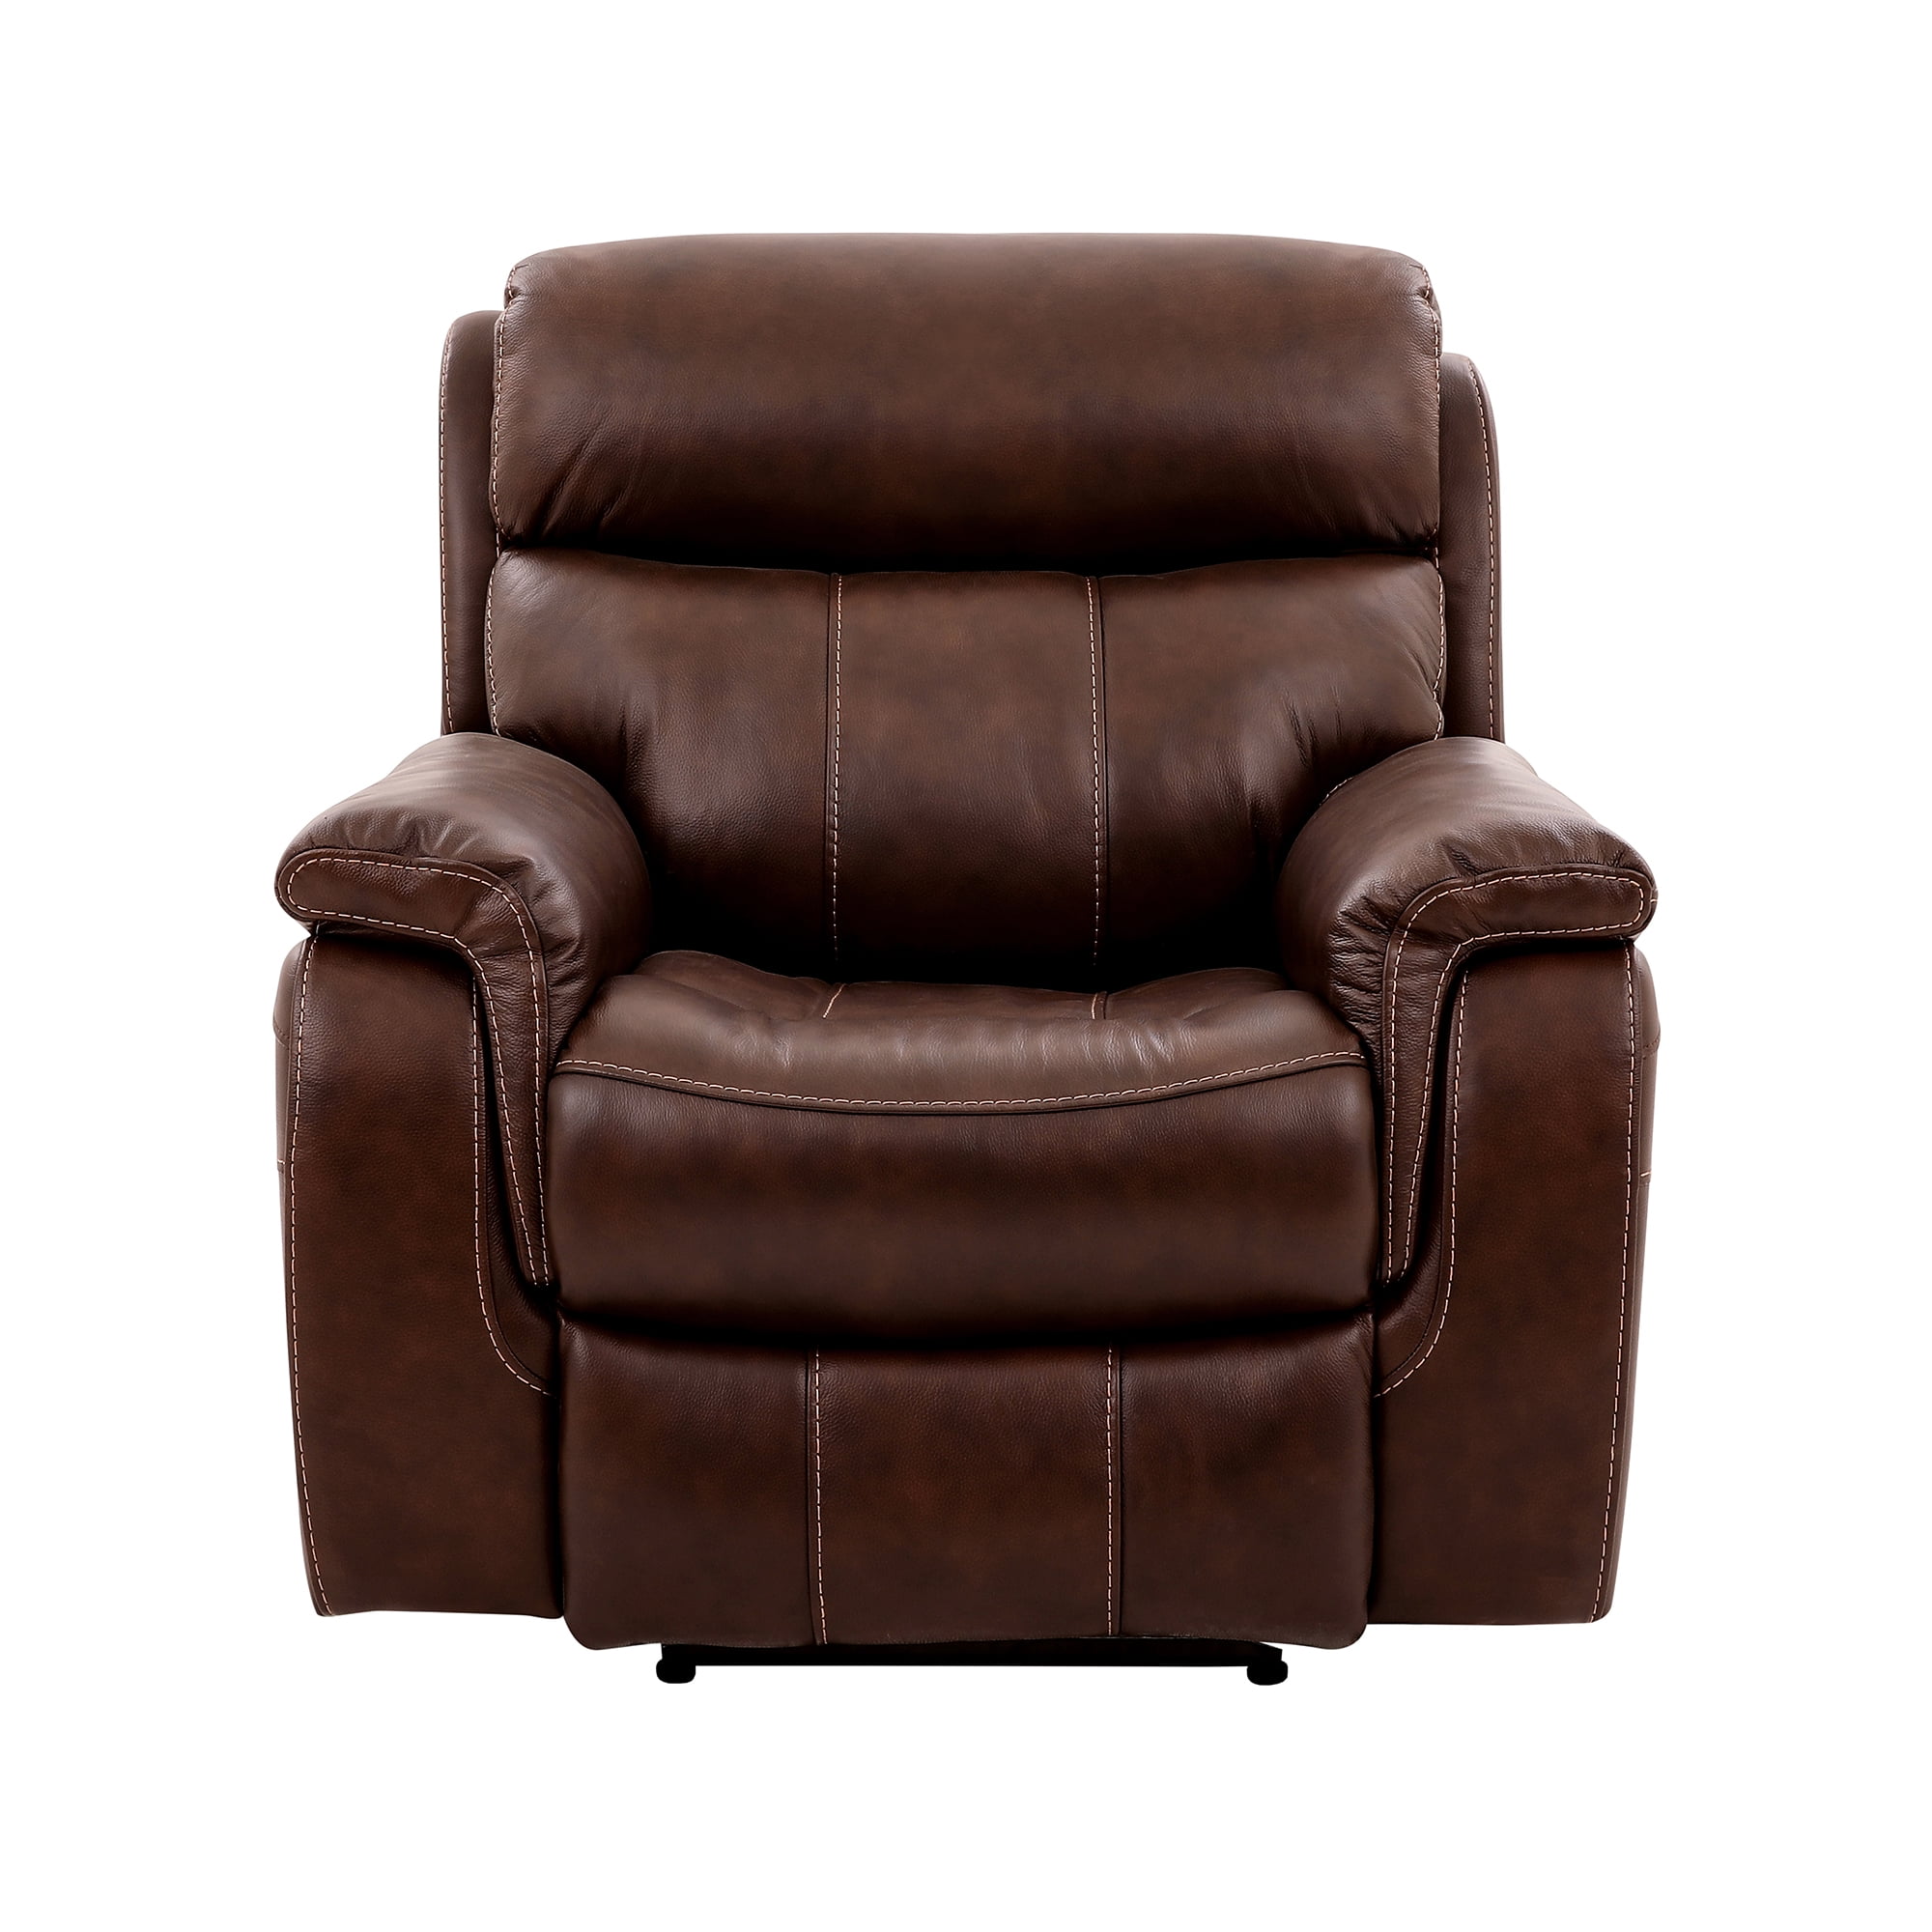 Picture of Armen Living LCMN1BR Montague Dual Power Headrest & Lumbar Support Recliner Chair in Genuine Brown Leather